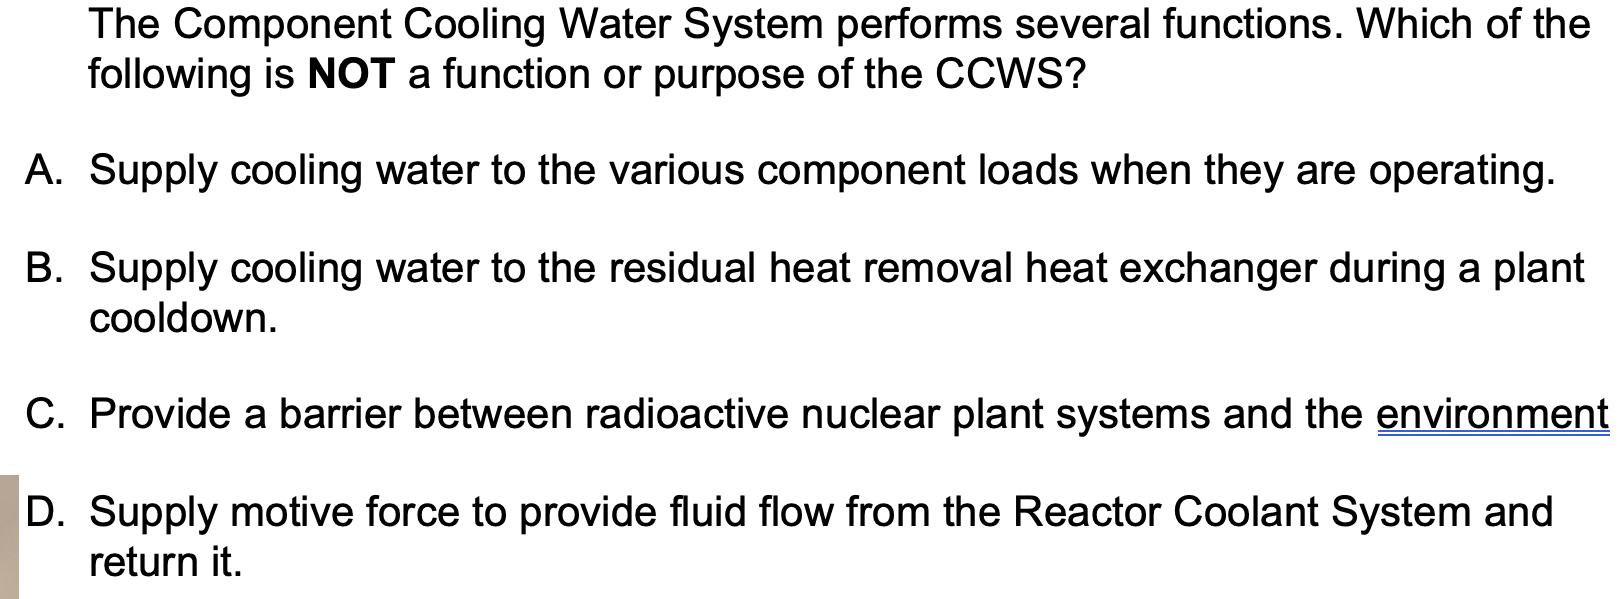 The Component Cooling Water System performs several functions. Which of the following is NOT a function or